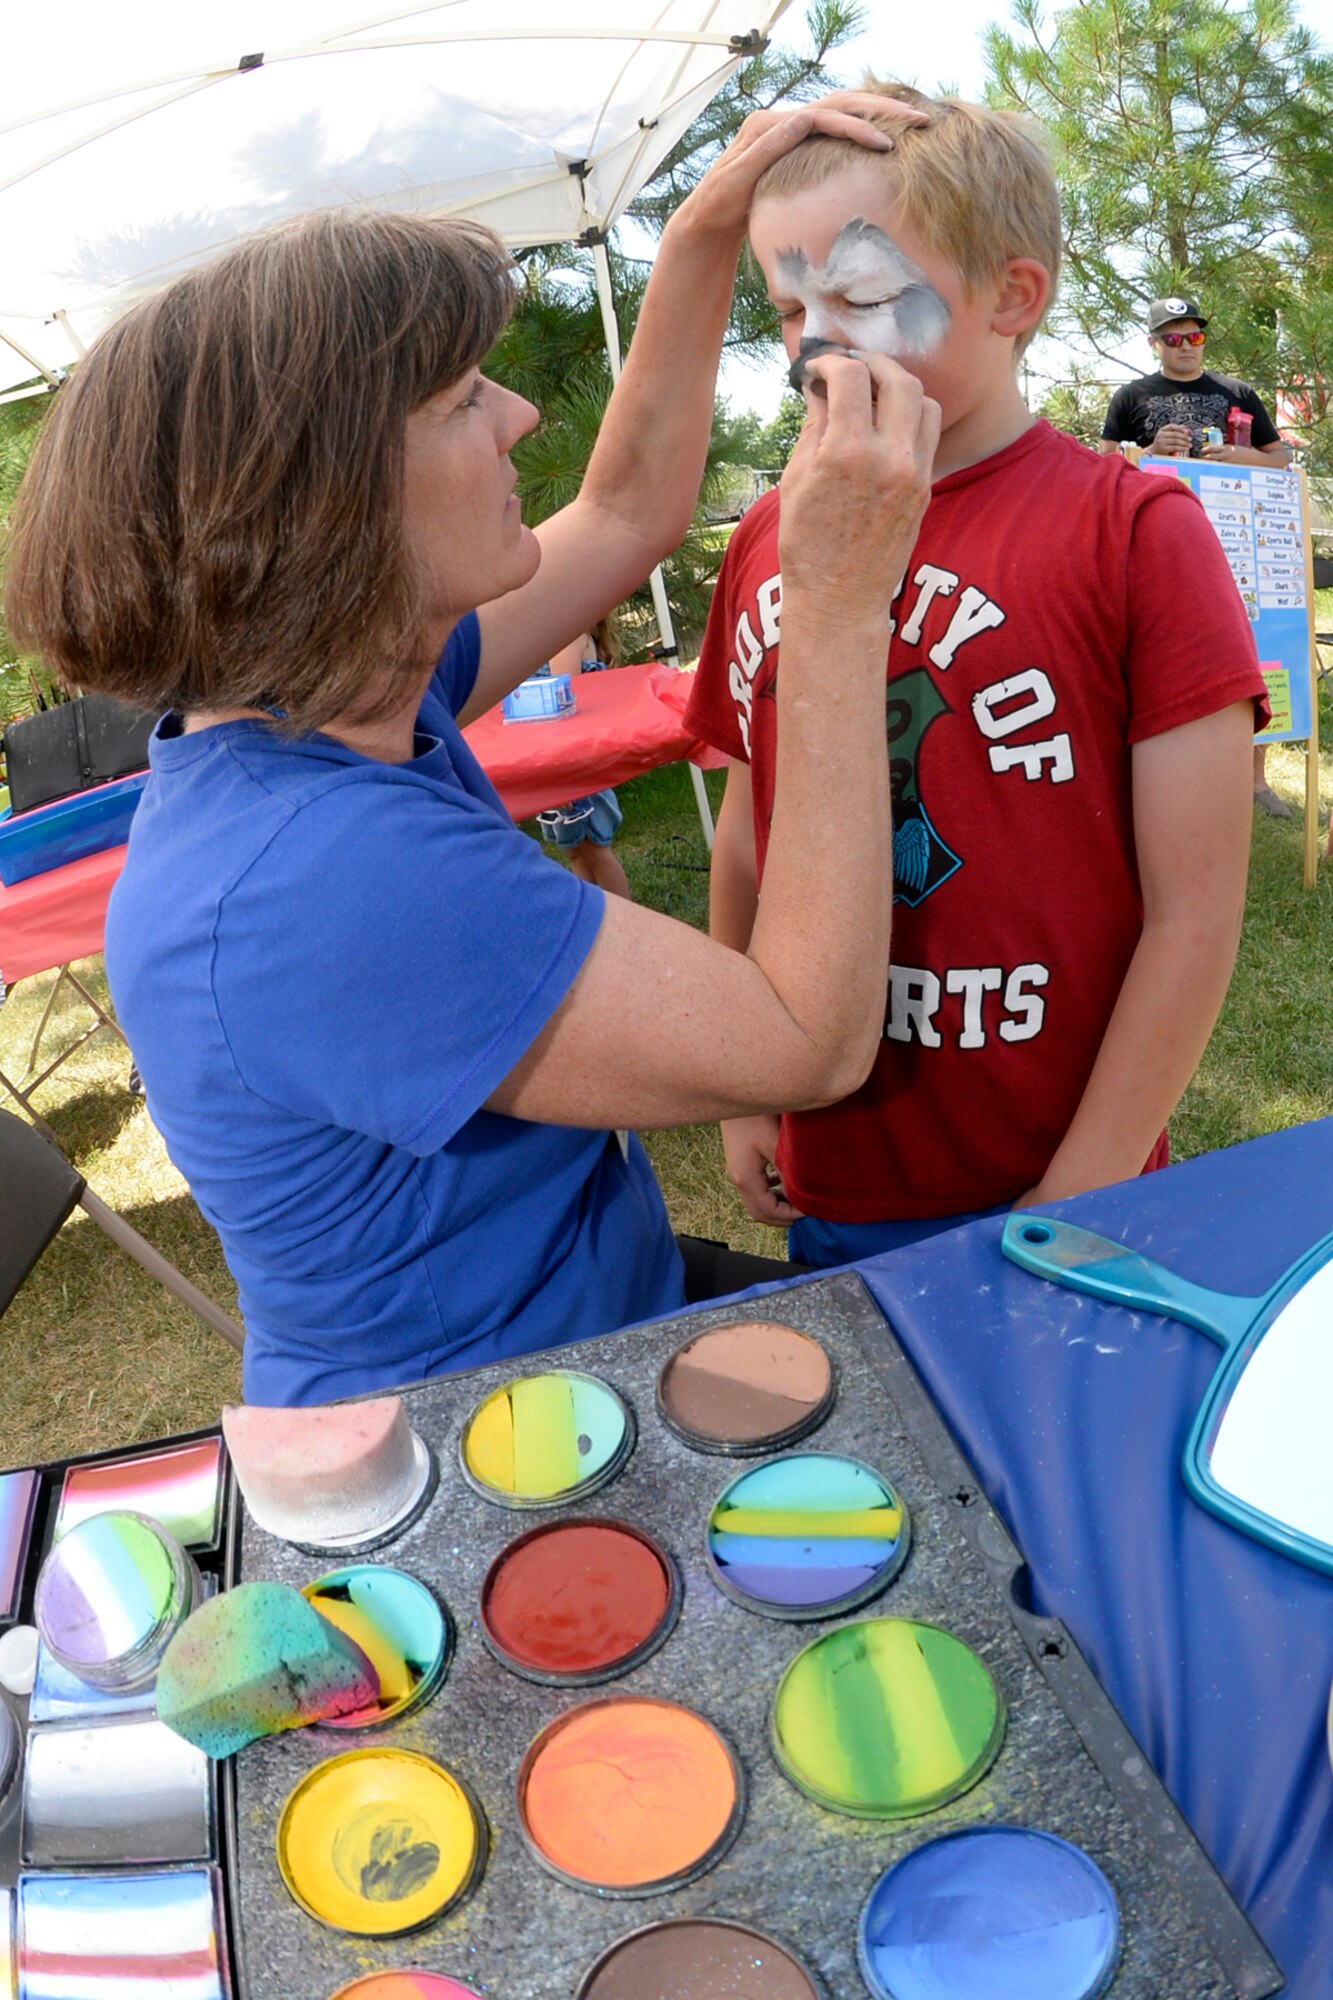 Susan Osler with Changing Faces, a local community sponsor, gives Calvin Lyons a new and fun face during the annual Salute Picnic, July 14 at Centennial Park. The event pulled dozens of community sponsors together to provide a day of food and fun for military members and families, and showed appreciation to those who serve. (Air Force photo/Todd Cromar)